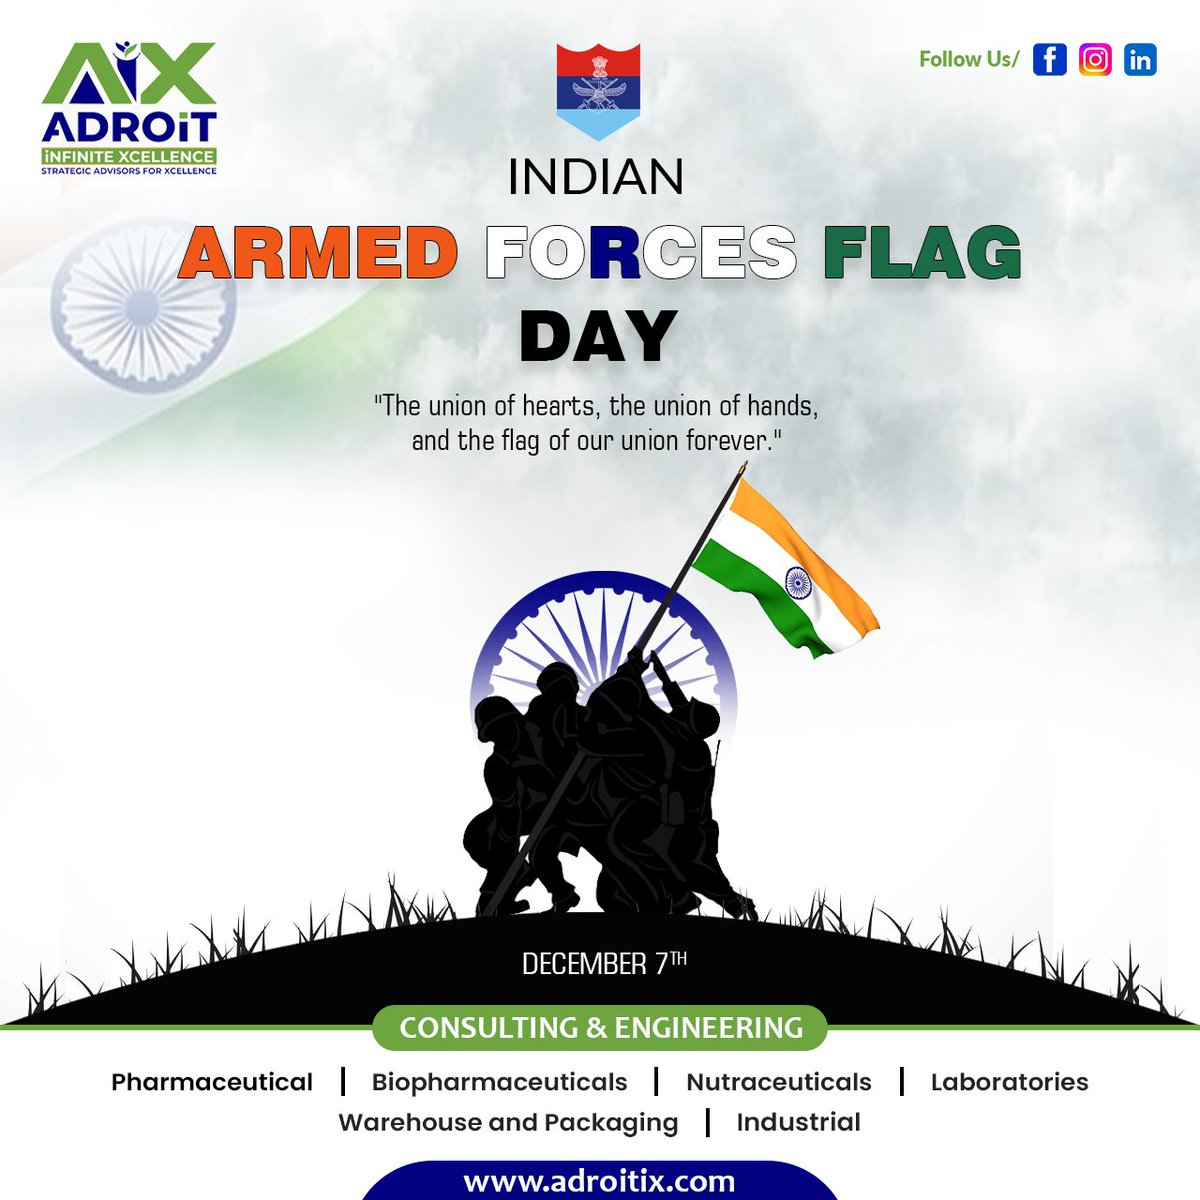 Saluting the valor and sacrifice of our heroes on Indian Armed Forces Flag Day, a tribute to the brave hearts who stand guard, protect our borders, and uphold the spirit of our nation.

#AiX #armedforcesflagday #proudlyindian #pharmaceutical #engineering #designconsultants